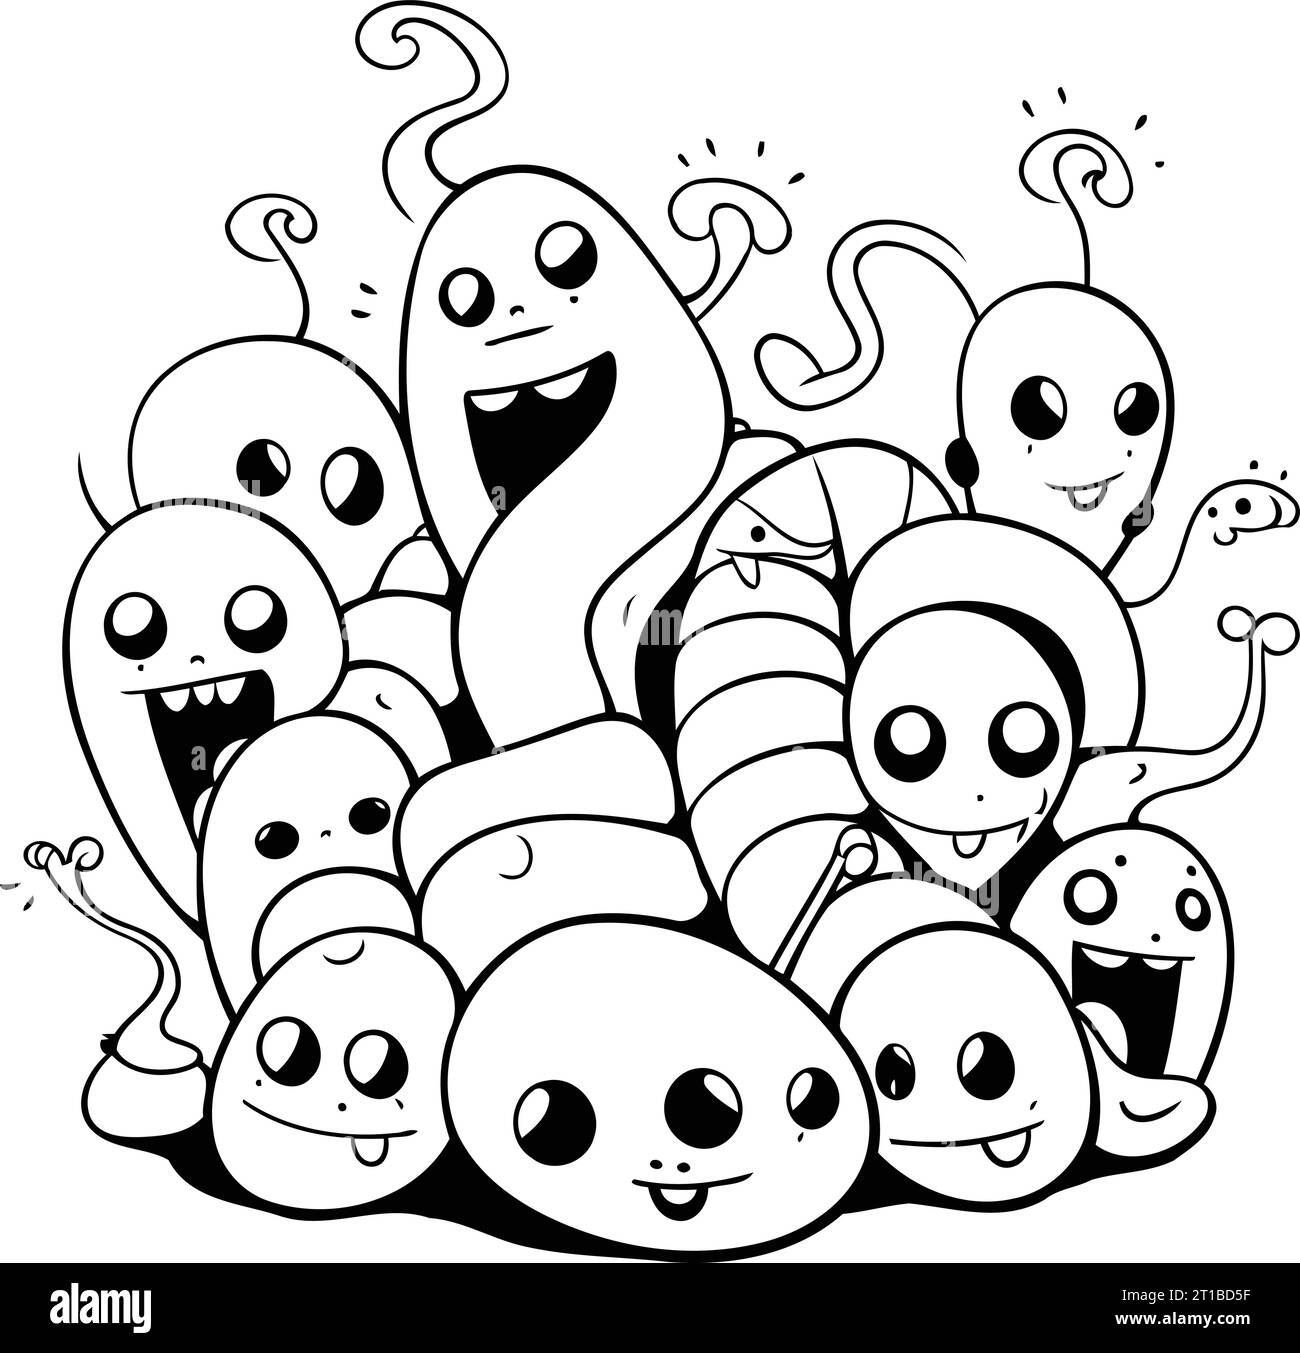 Black and white vector illustration of a group of funny monsters. Cartoon style. Stock Vector